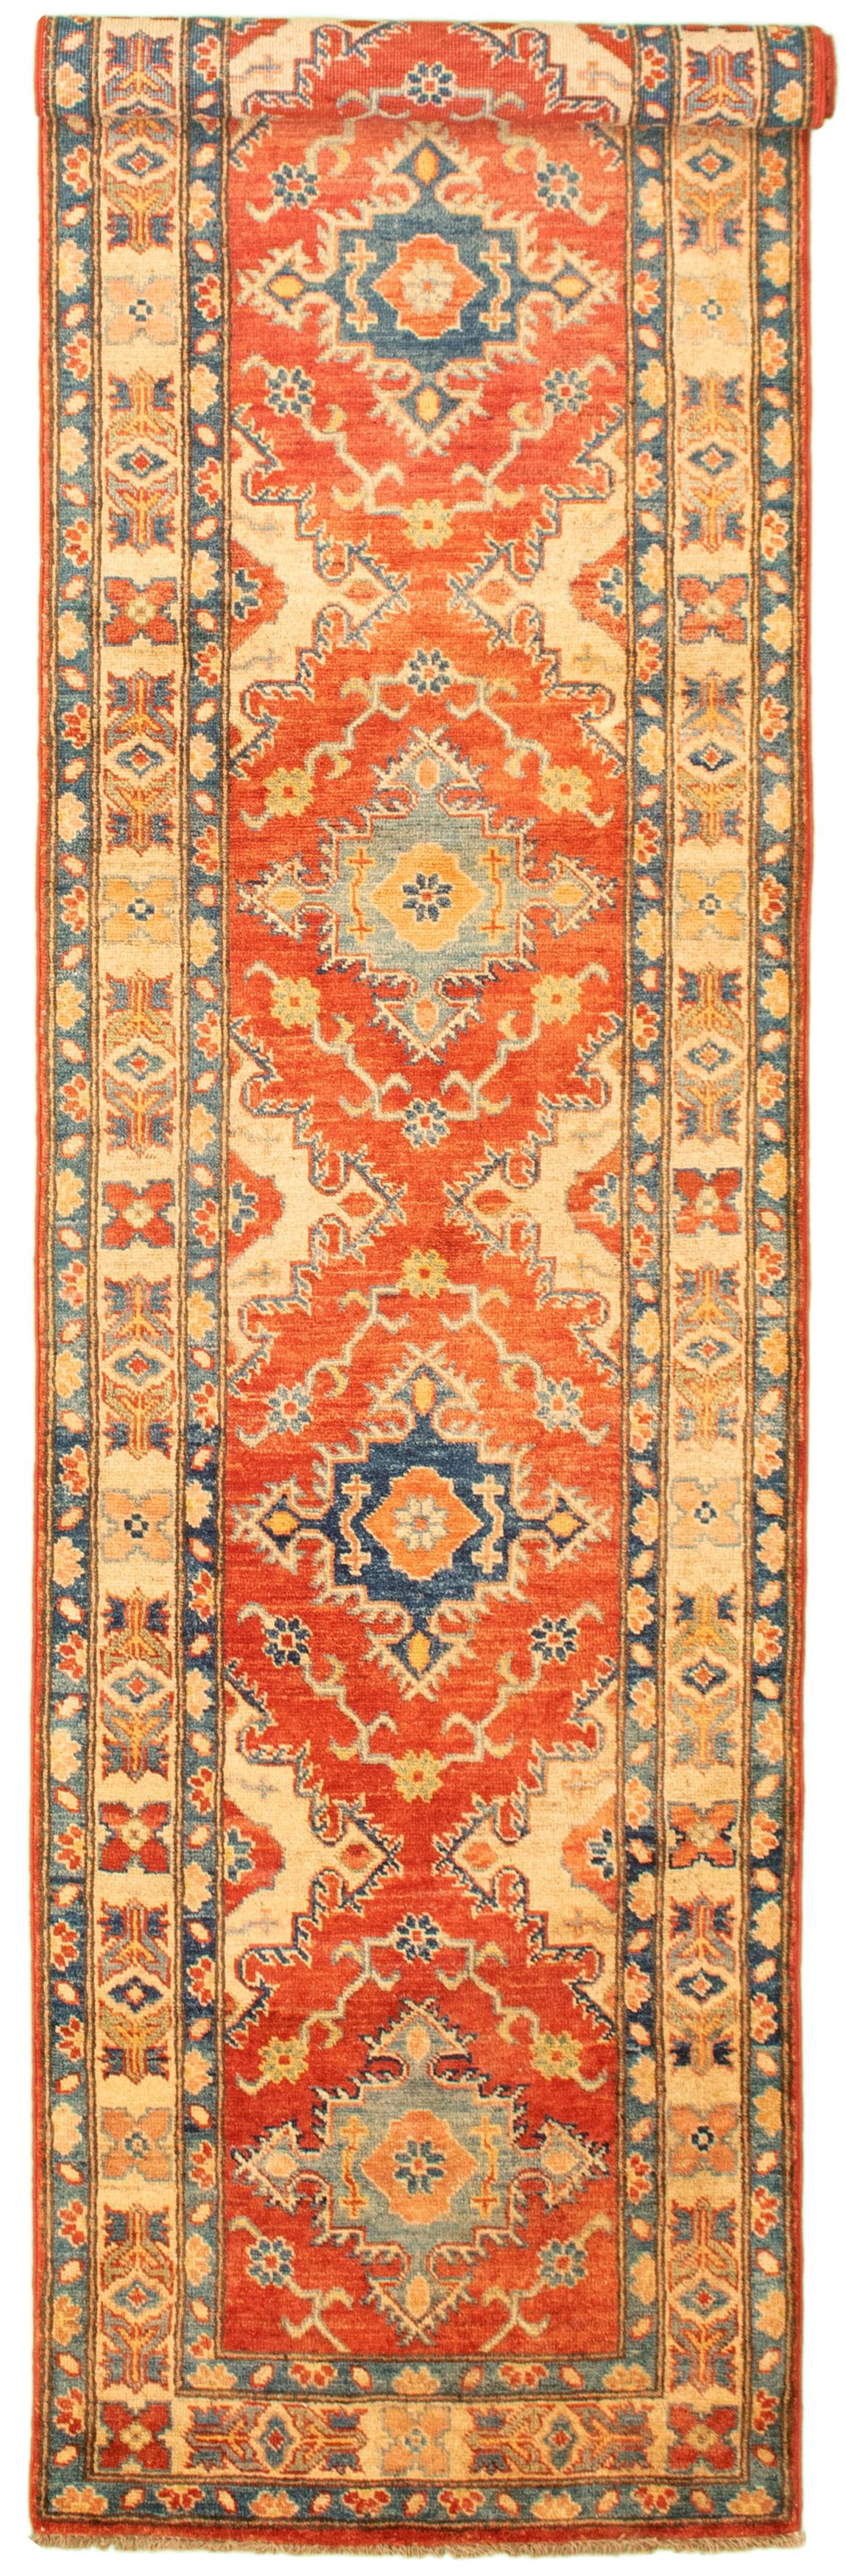 Hand-knotted Finest Gazni Red Wool Rug 2'8" x 11'4" Size: 2'8" x 11'4"  